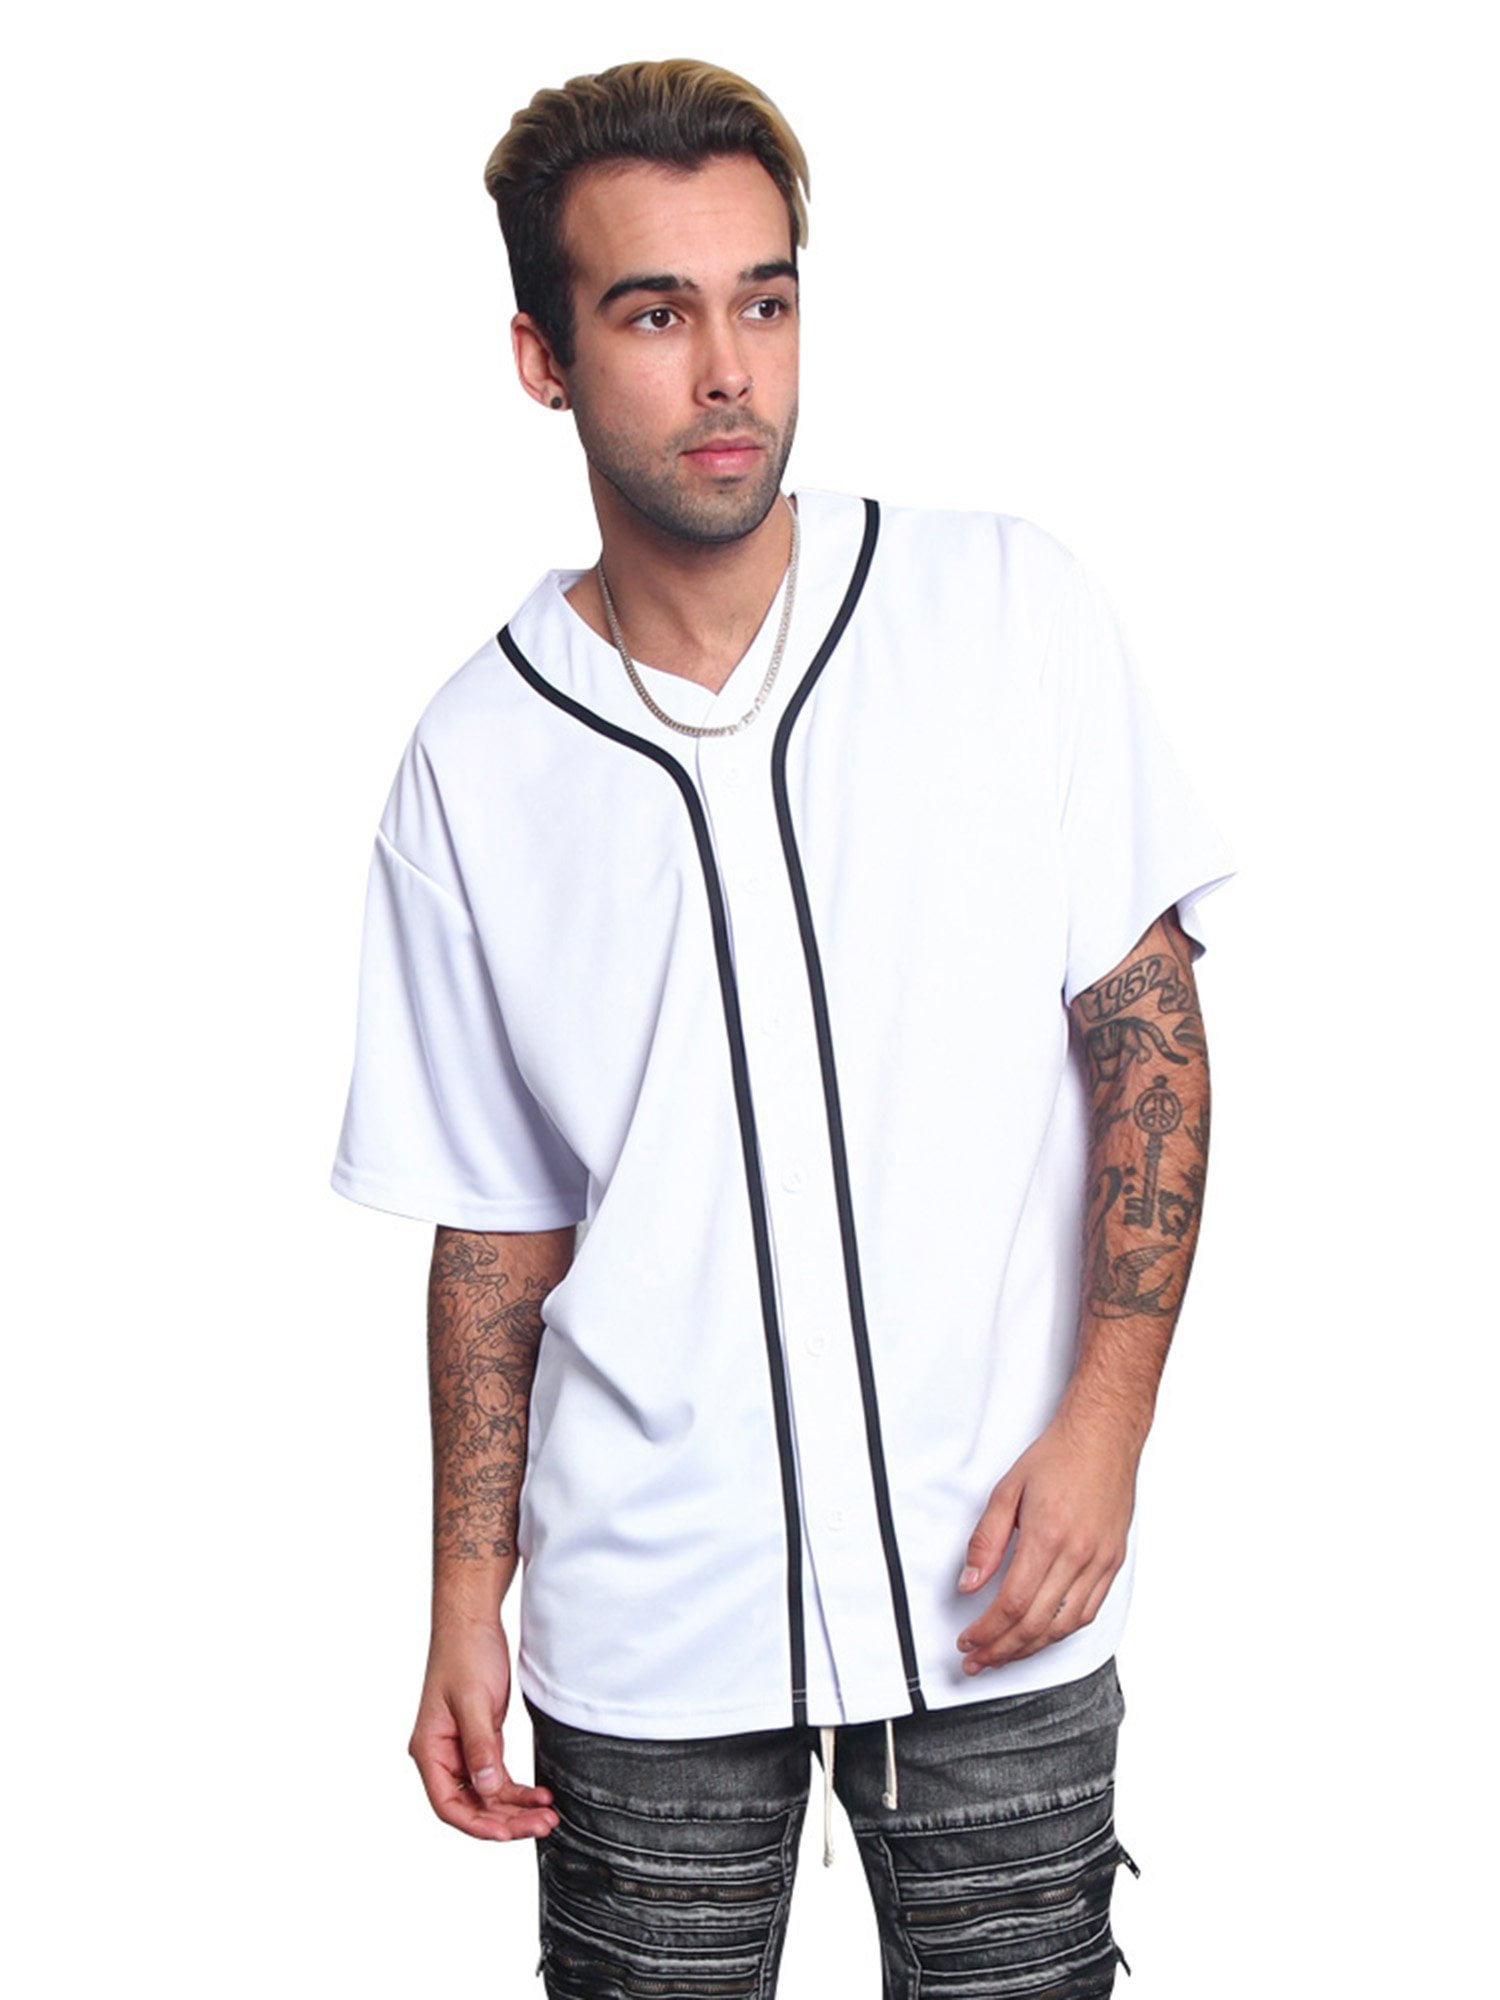 mens baseball jersey outfit